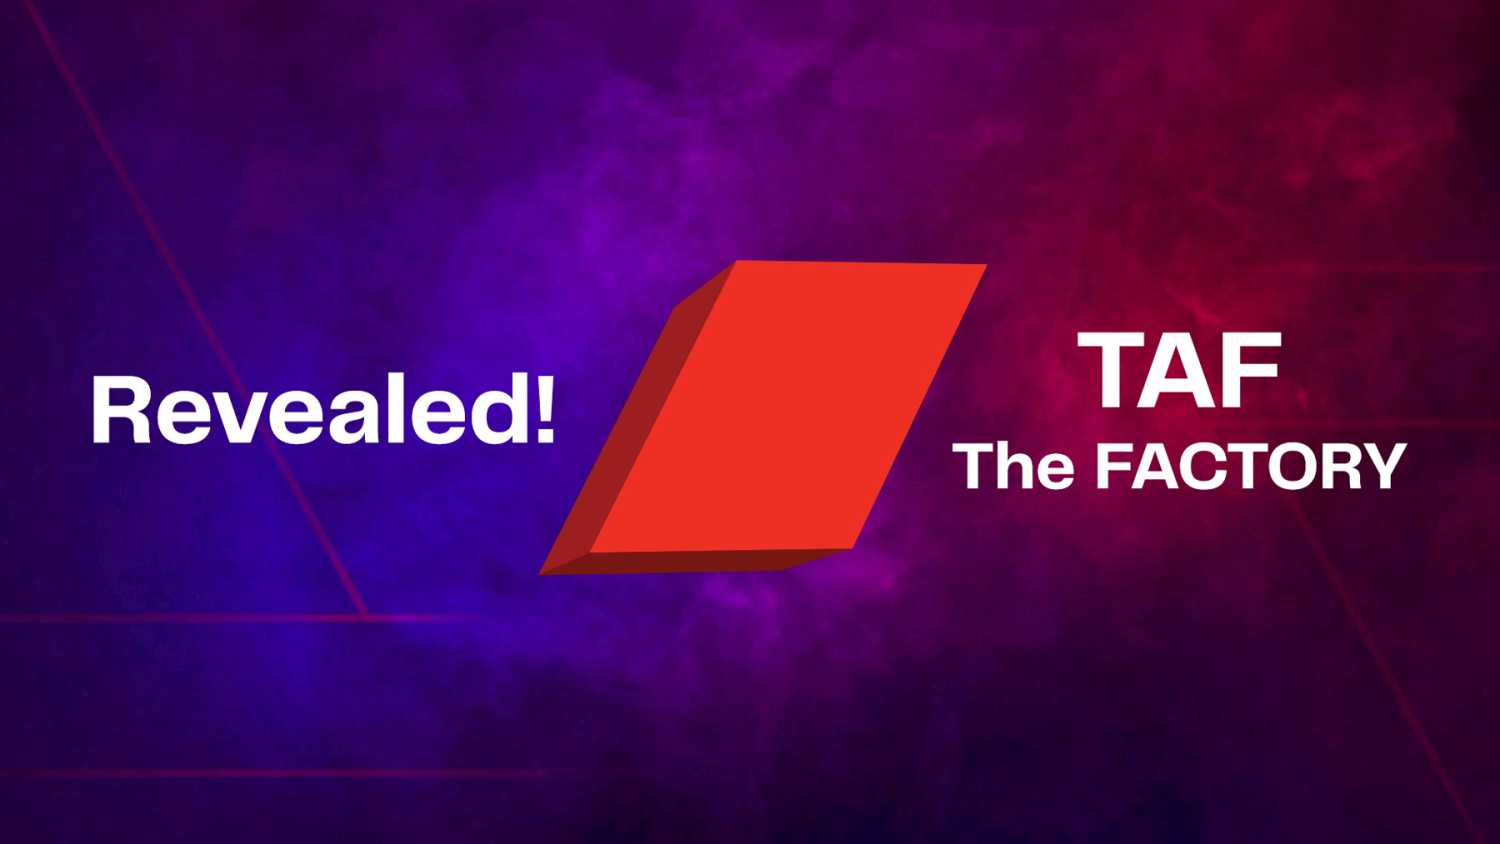 New year, new logo for TAF